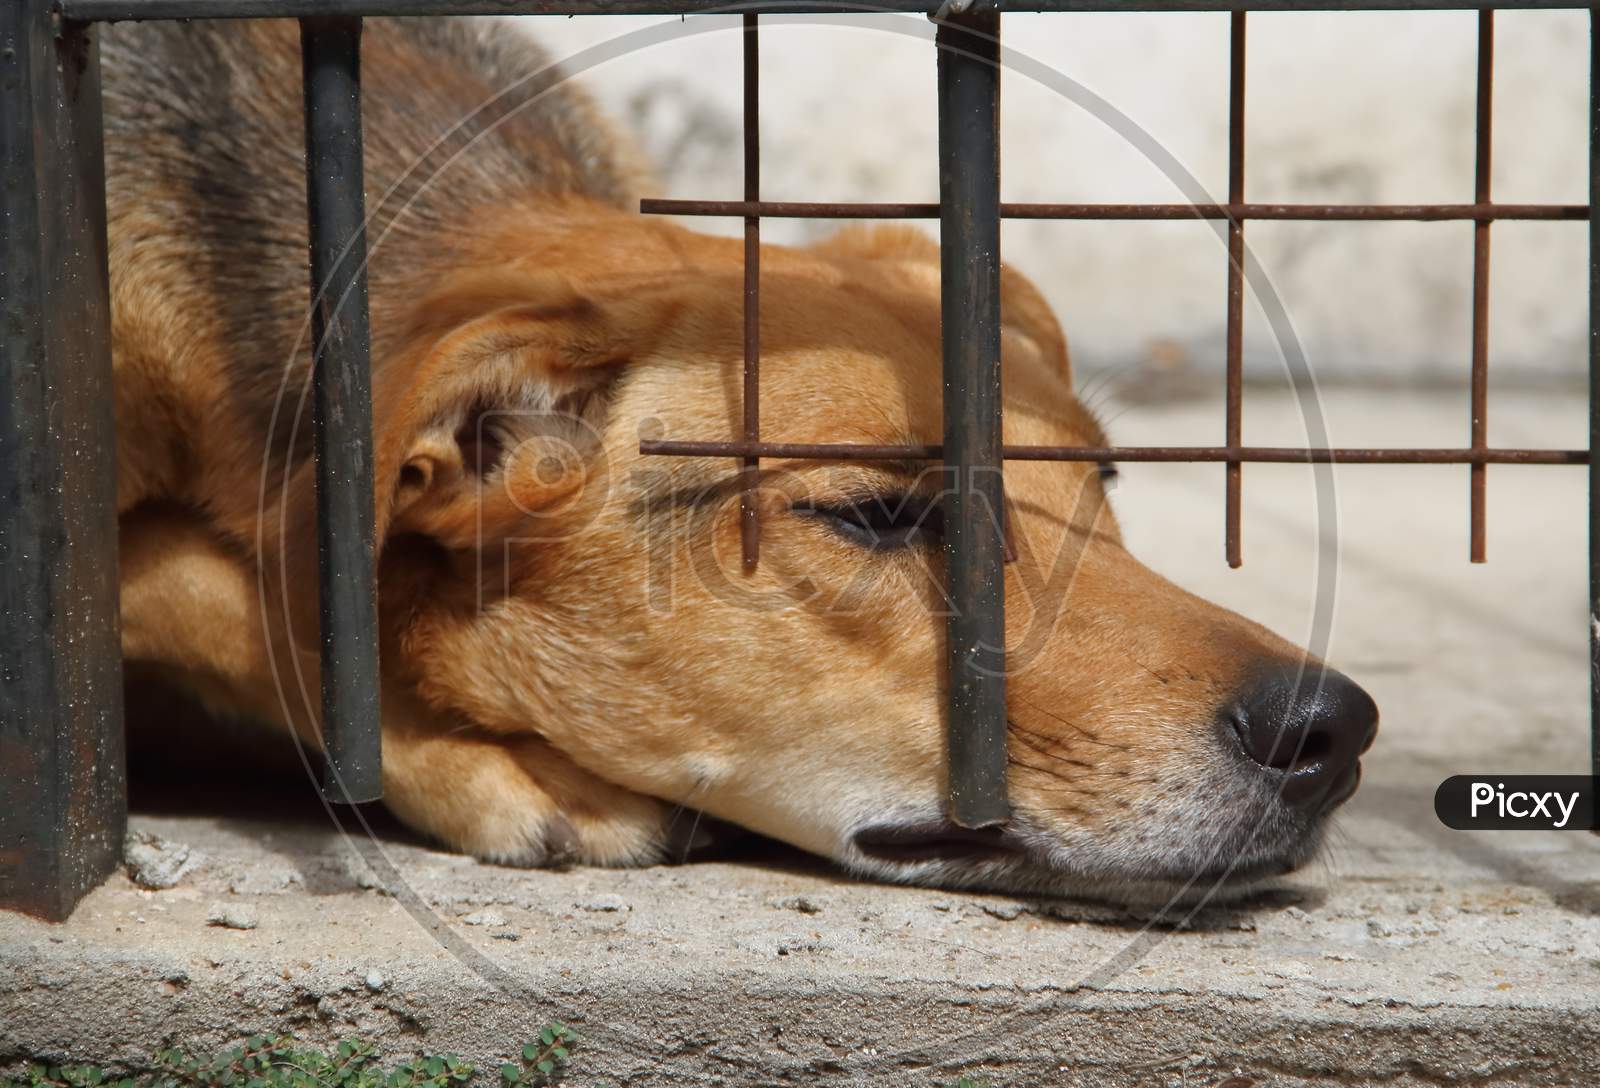 image-of-dogs-locked-up-victims-of-animal-abuse-and-abuse-us564624-picxy